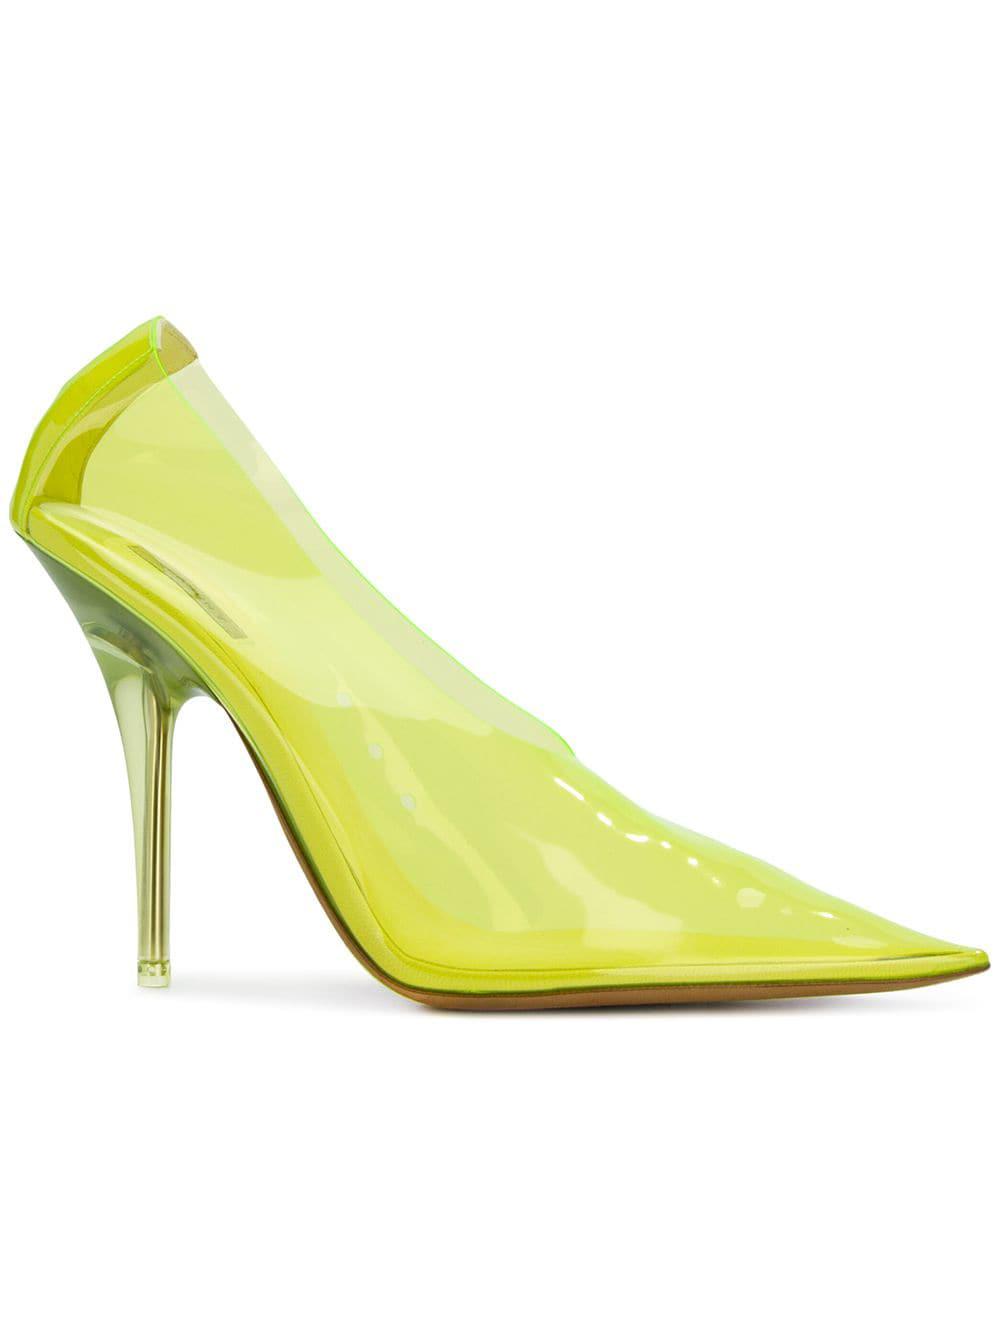 Yeezy Leather Clear Pointed Pumps in Yellow & Orange (Yellow) | Lyst